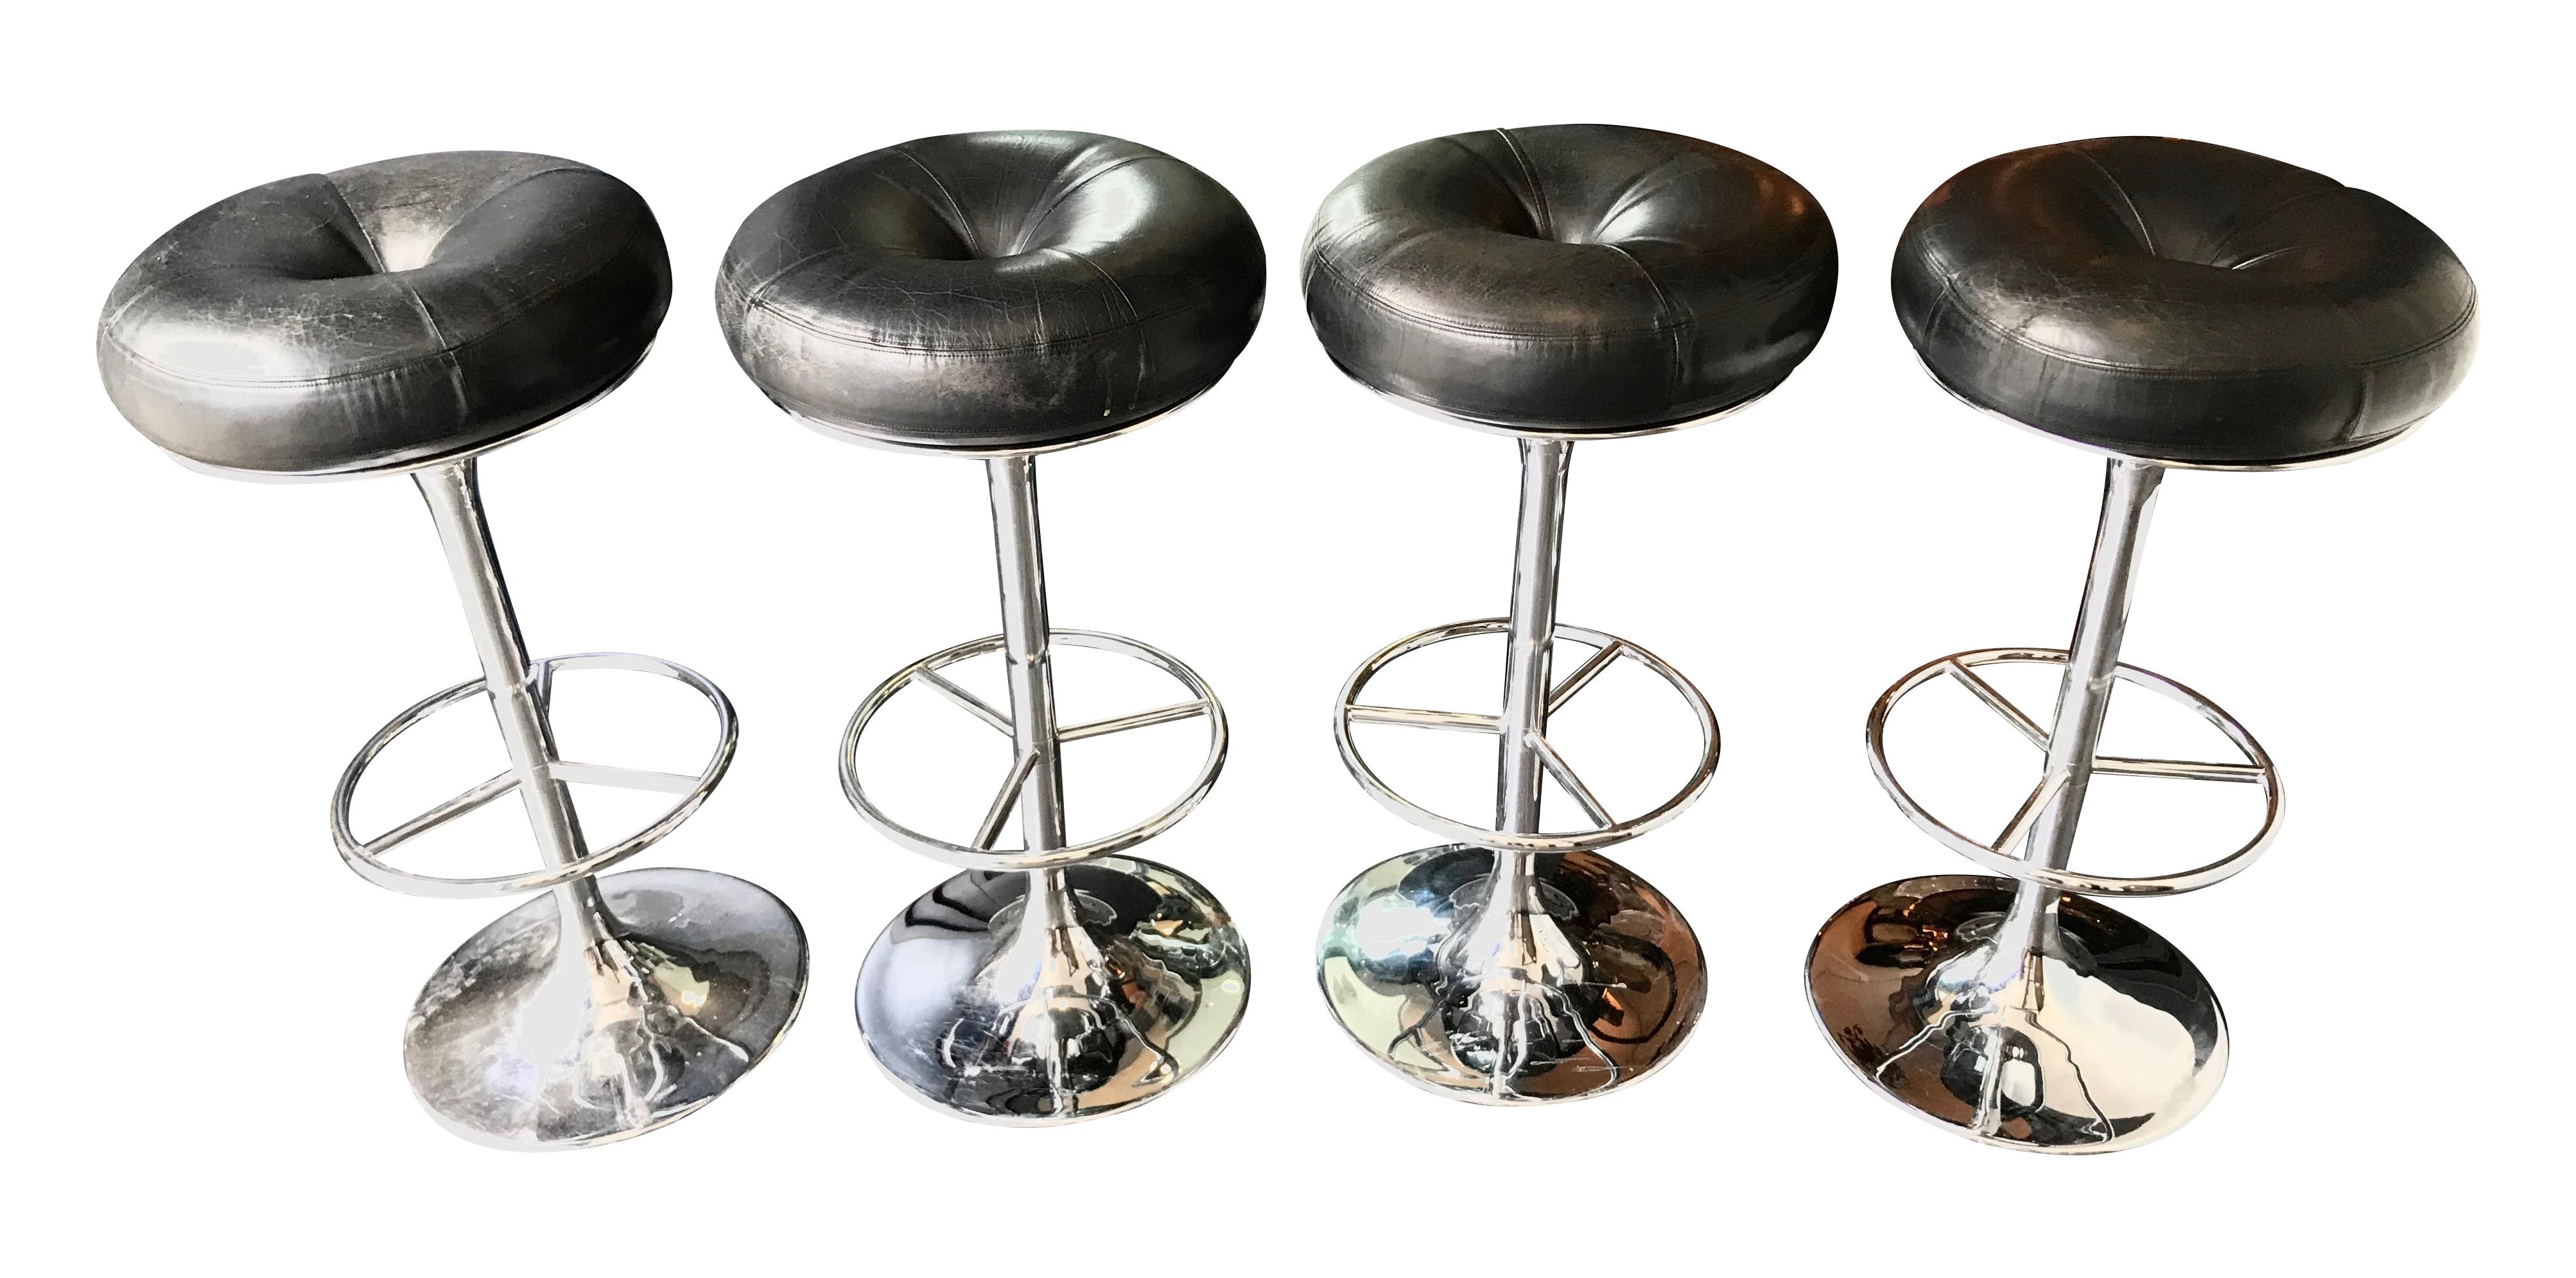 A set of 4 1970s chrome and black leather bar stools by Johanson Design, Sweden each with chrome footrest.